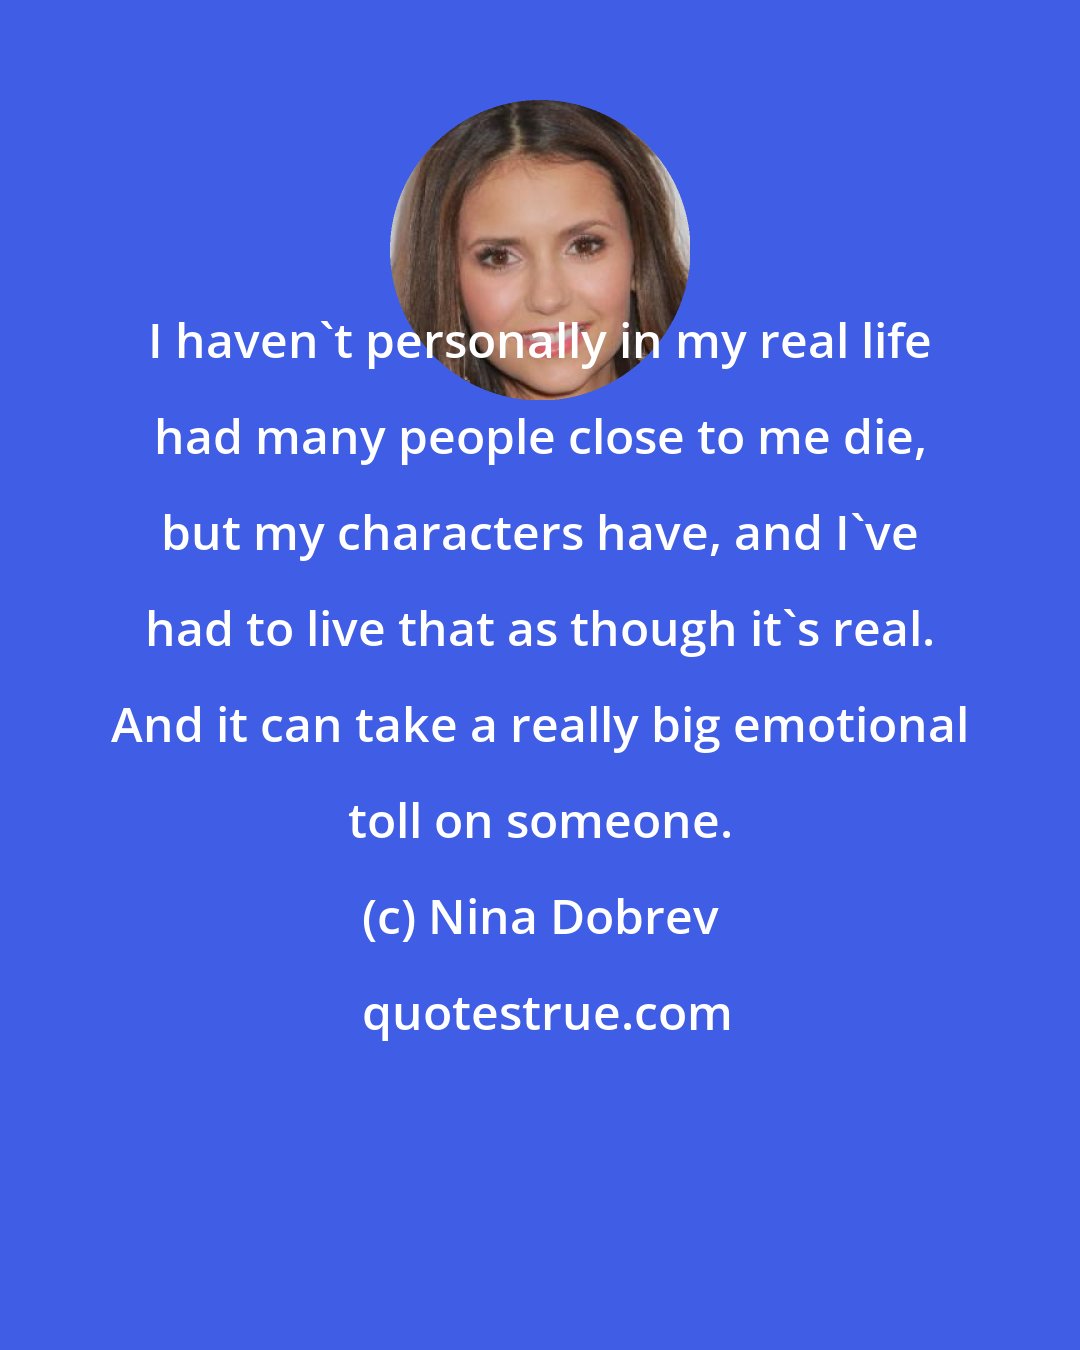 Nina Dobrev: I haven't personally in my real life had many people close to me die, but my characters have, and I've had to live that as though it's real. And it can take a really big emotional toll on someone.